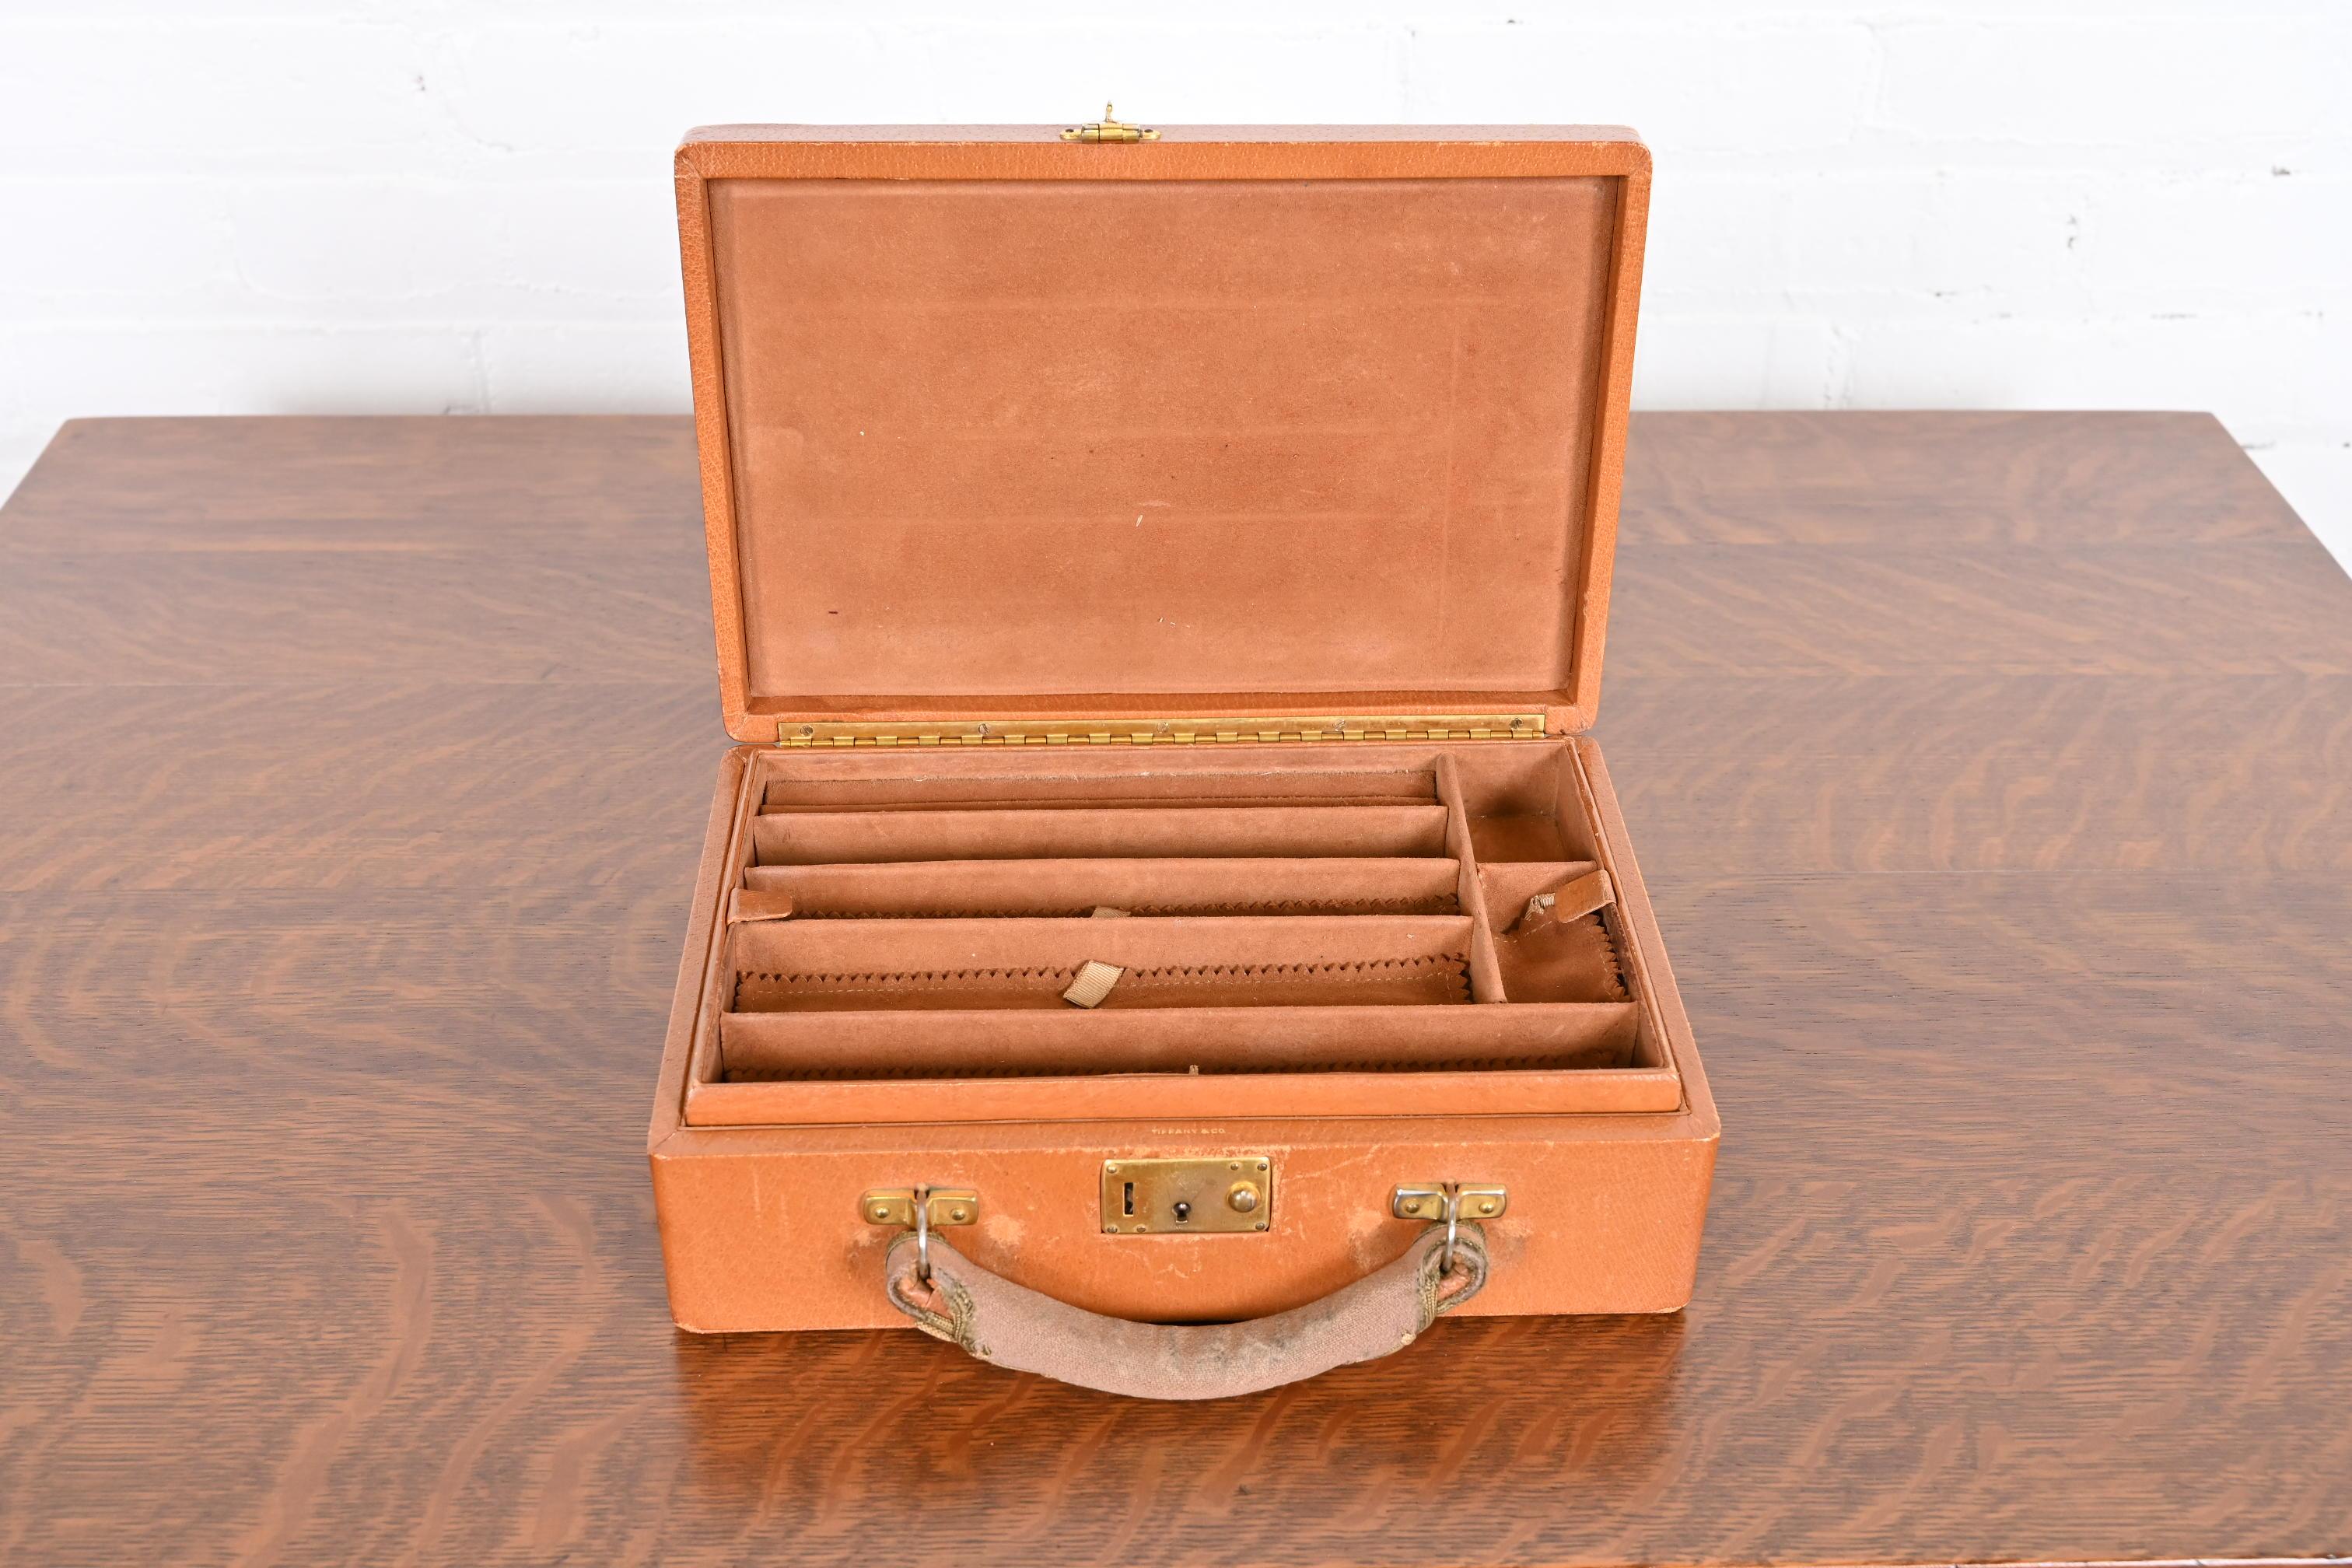 A stylish women's jewelry box or case

By Tiffany & Co.

New York, USA, Mid-20th Century

Beautiful camel-colored leather, with brushed suede interior. Includes original canvas travel cover.

Measures: 10.25